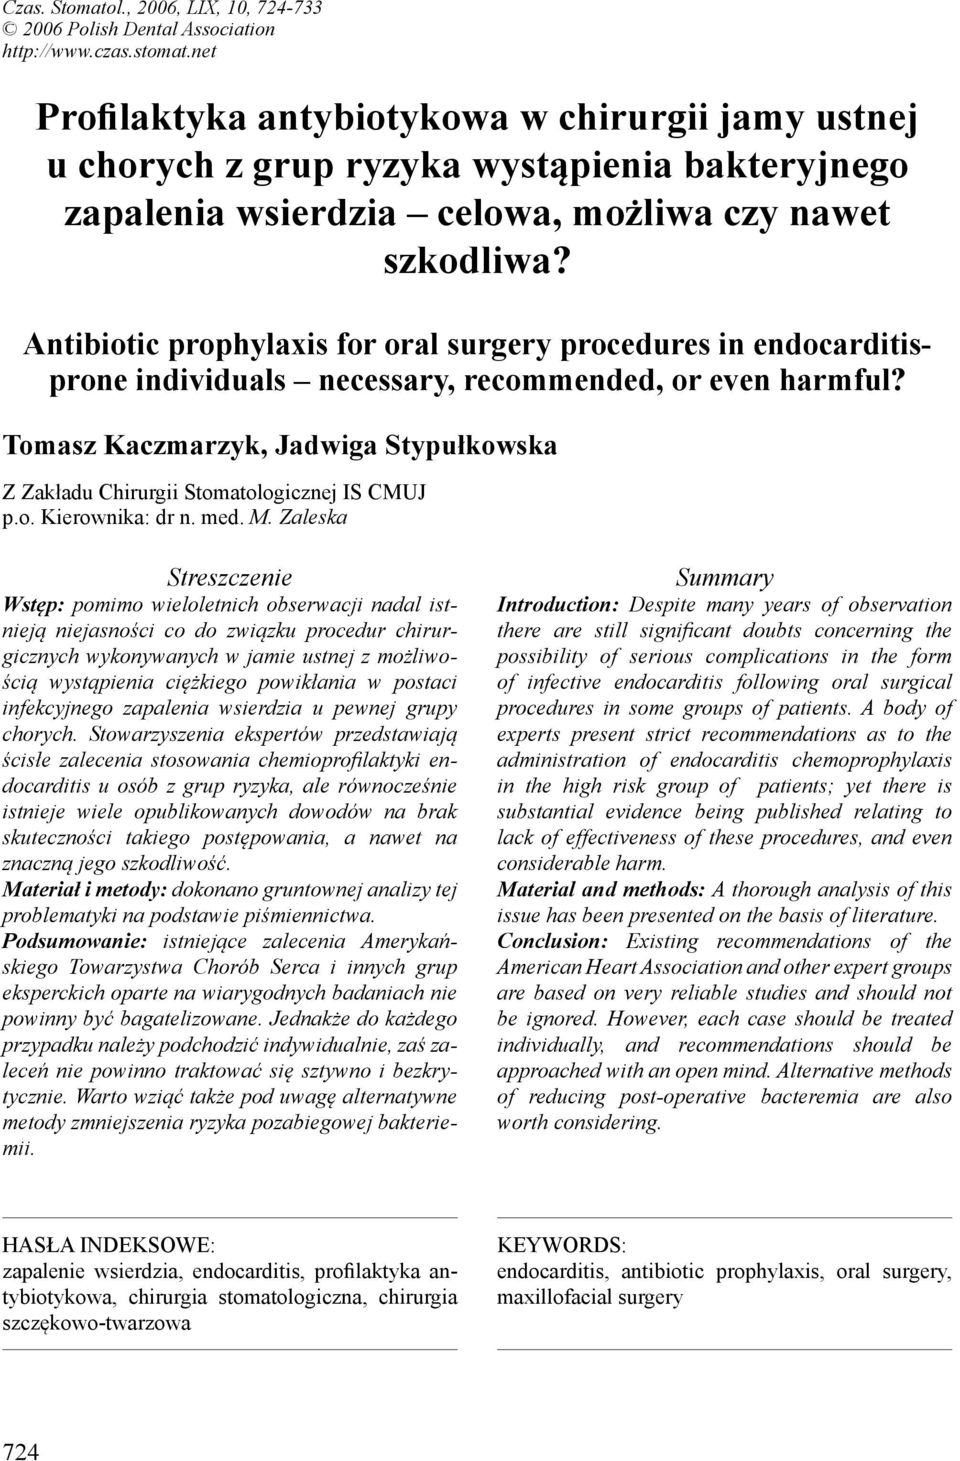 Antibiotic prophylaxis for oral surgery procedures in endocarditisprone individuals necessary, recommended, or even harmful?